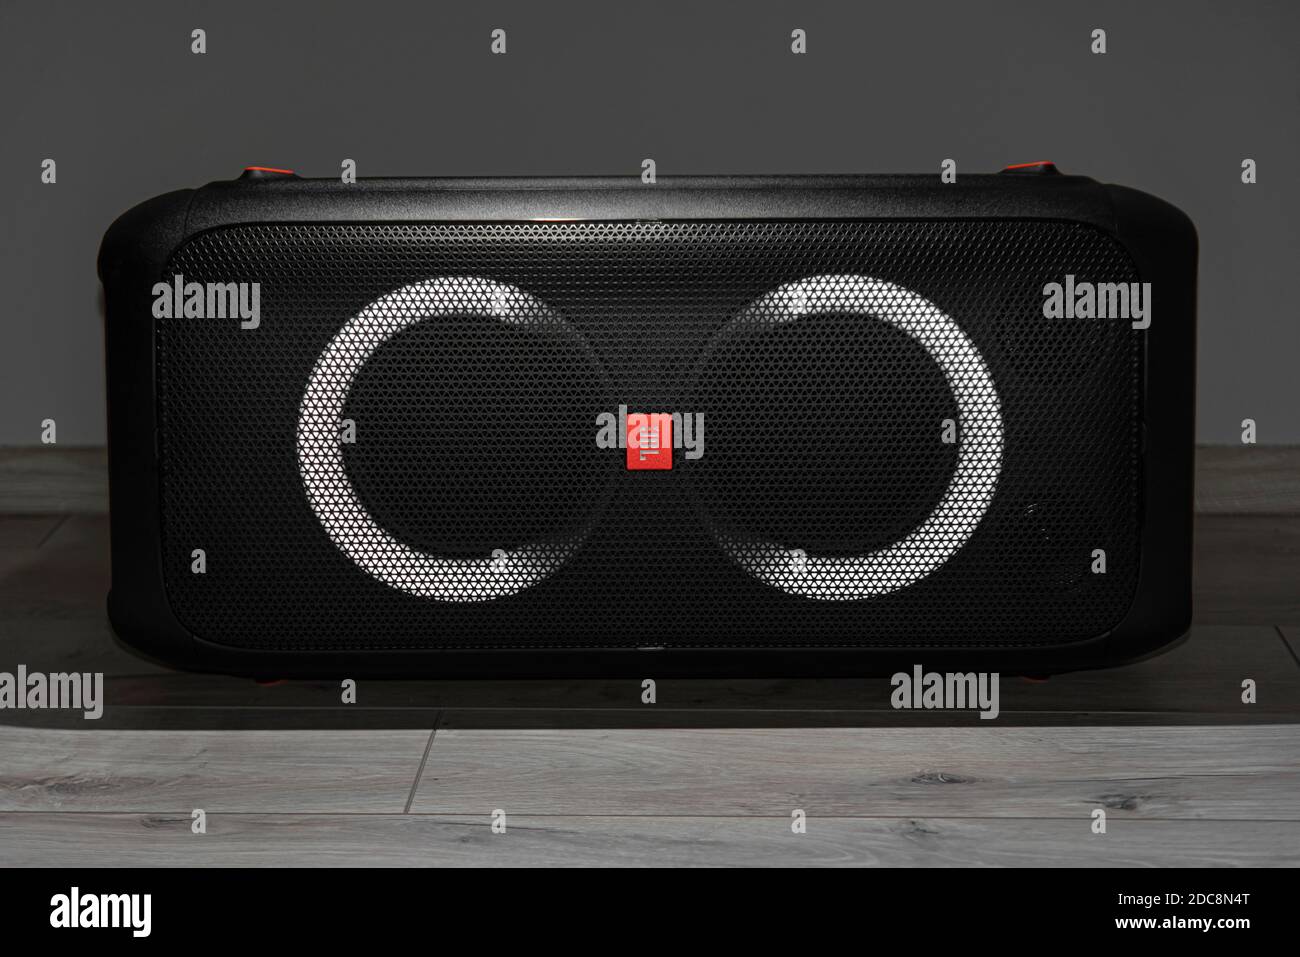 JBL Partybox 310 - new portable speaker from JBL Stock Photo - Alamy